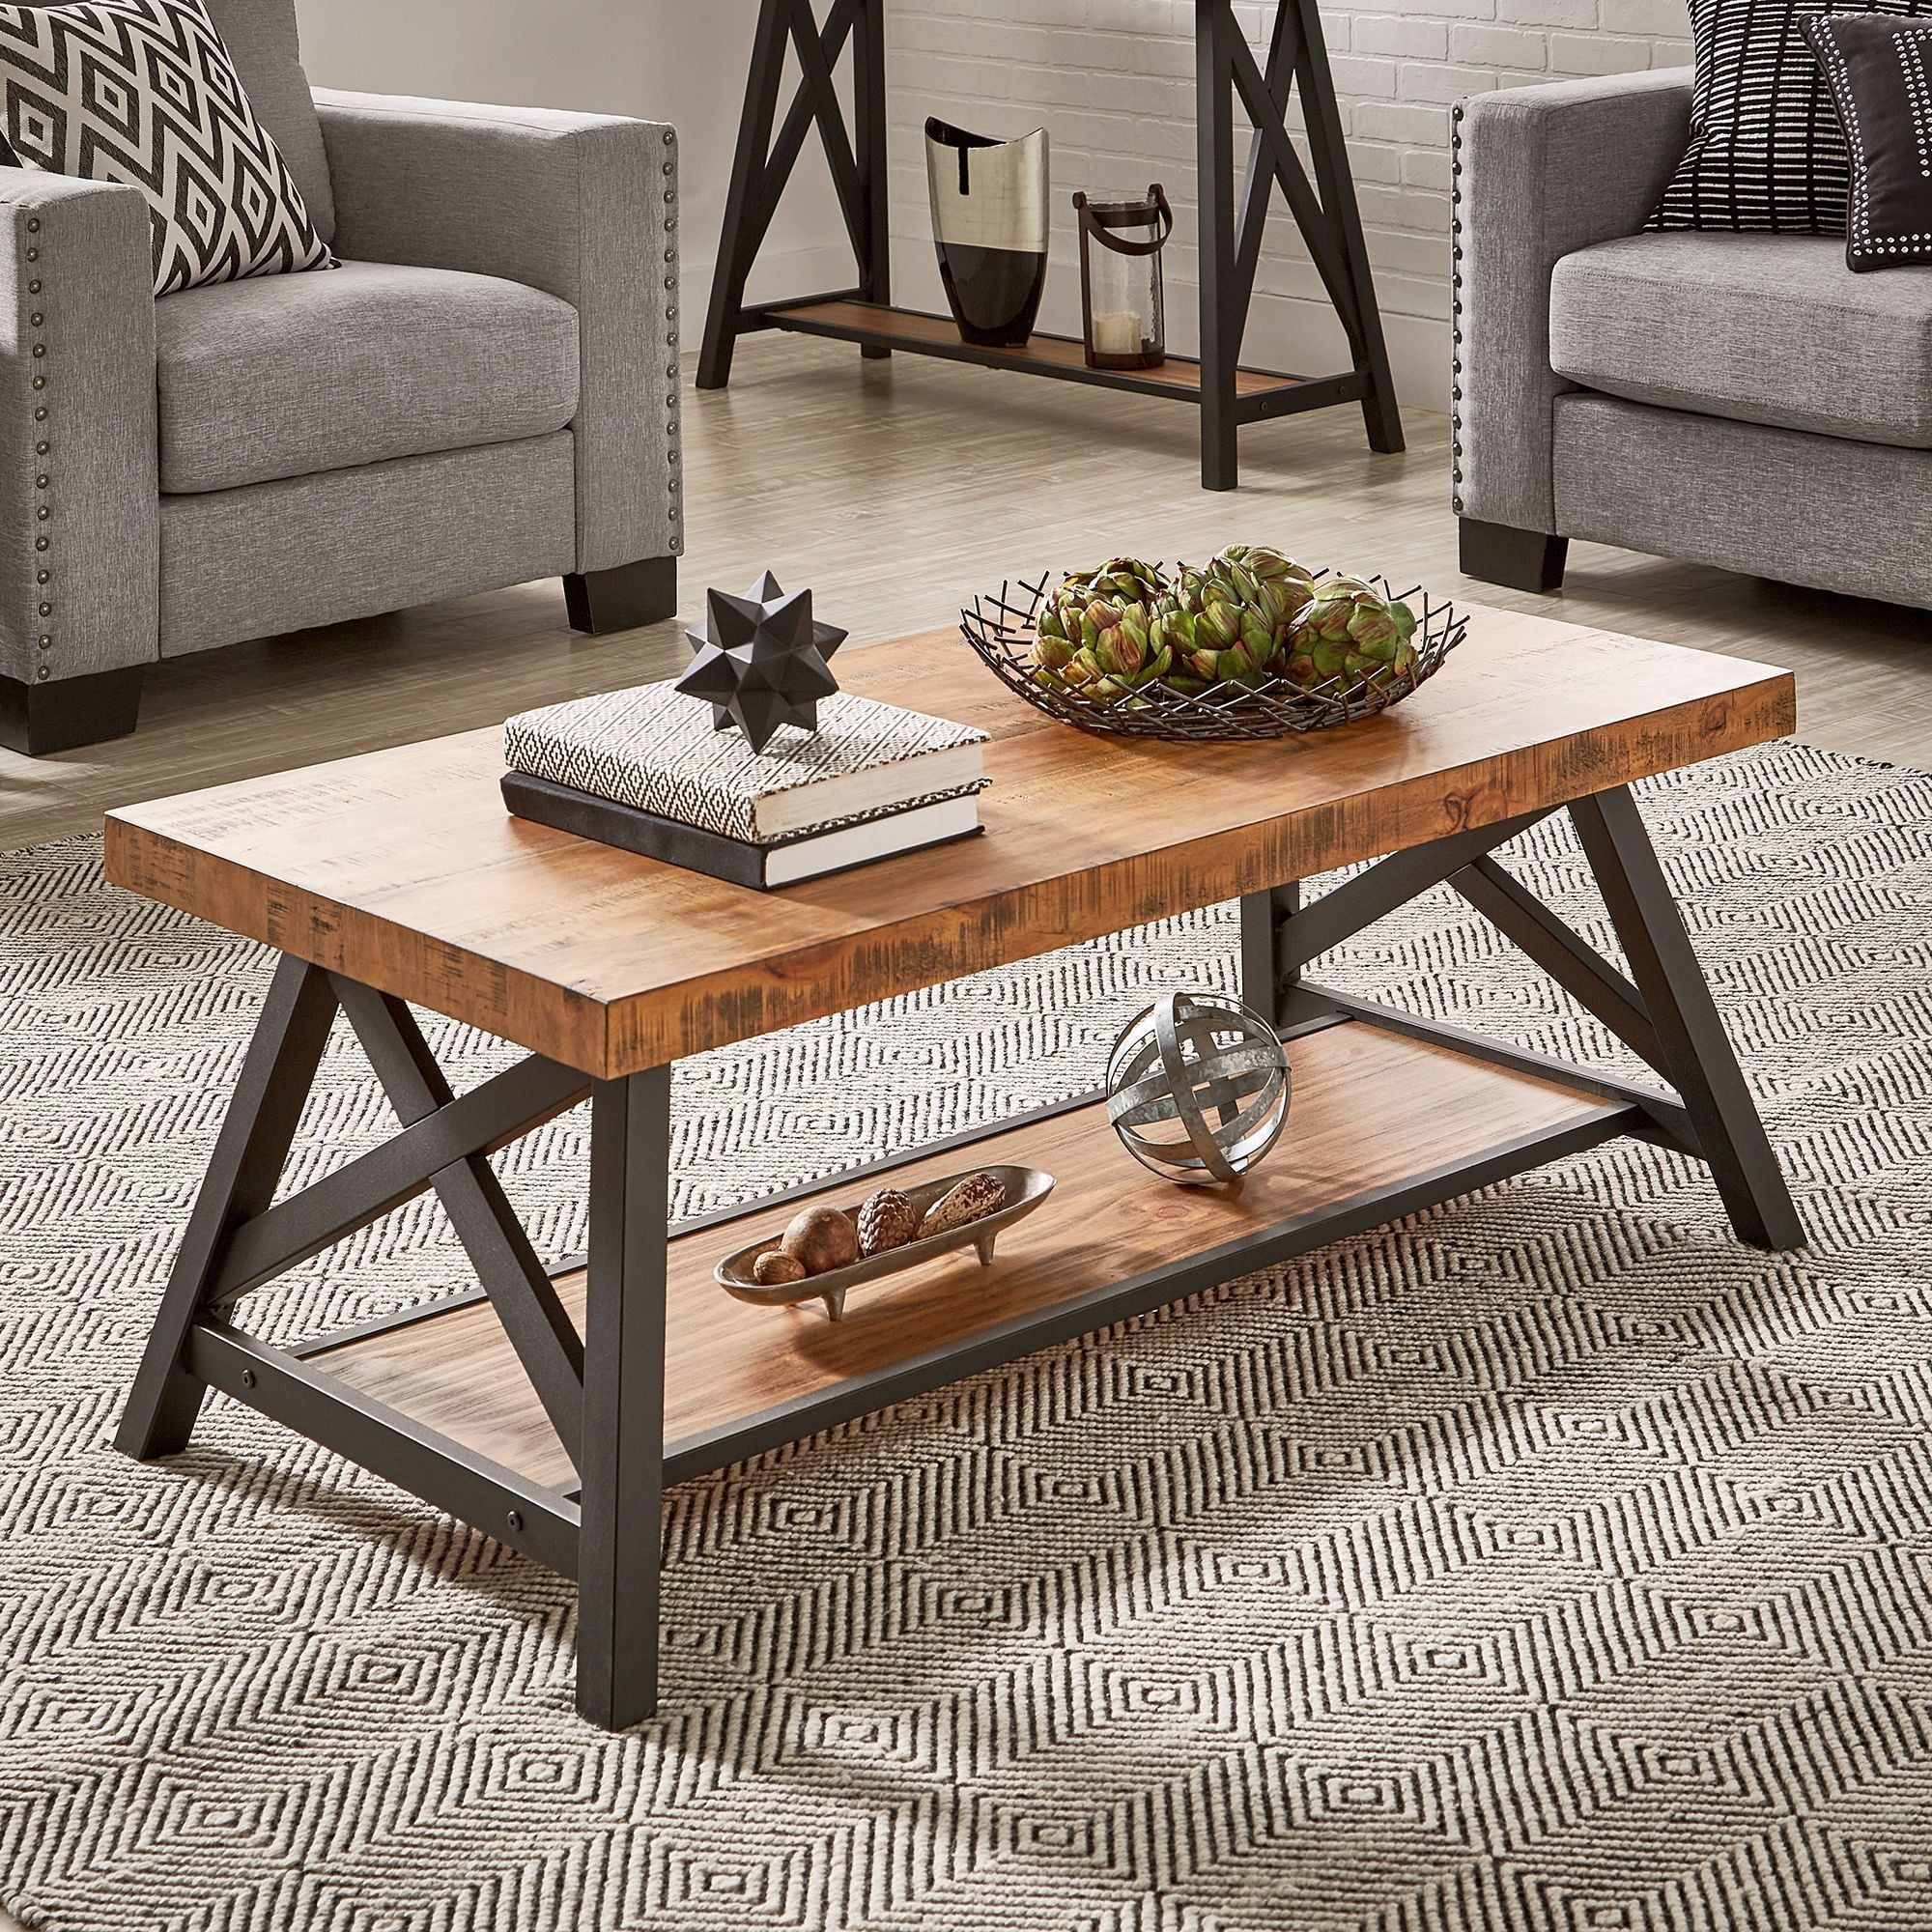 Weston Home Westyn Rustic X Base Wood Rectangular Coffee Table, Gray –  Walmart In Rectangular Coffee Tables With Pedestal Bases (Photo 10 of 15)